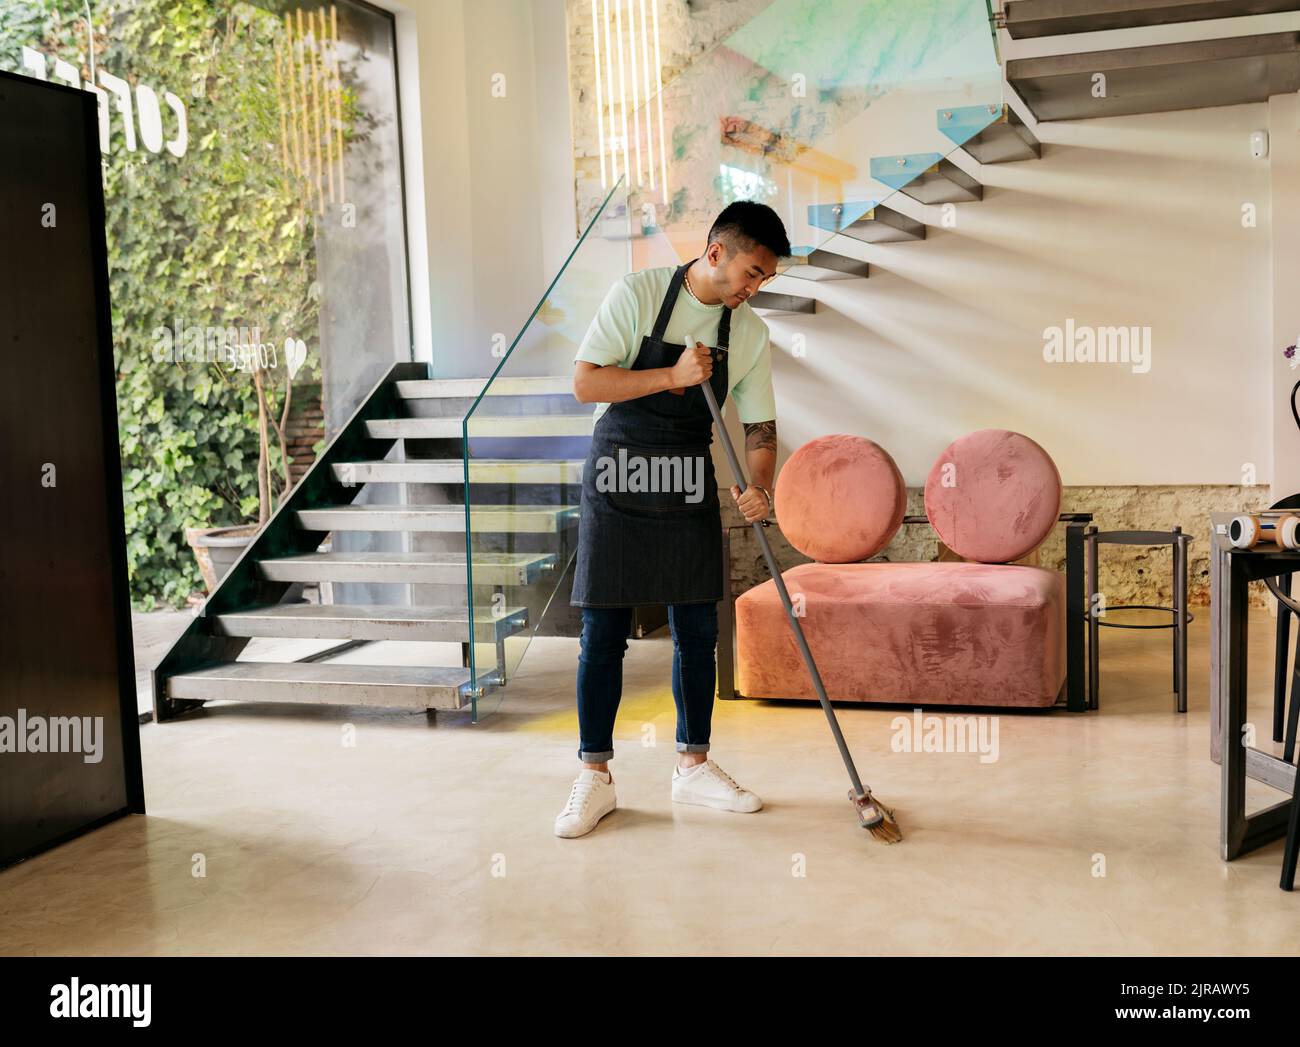 Young man wearing apron cleaning floor with broom in cafe Stock Photo